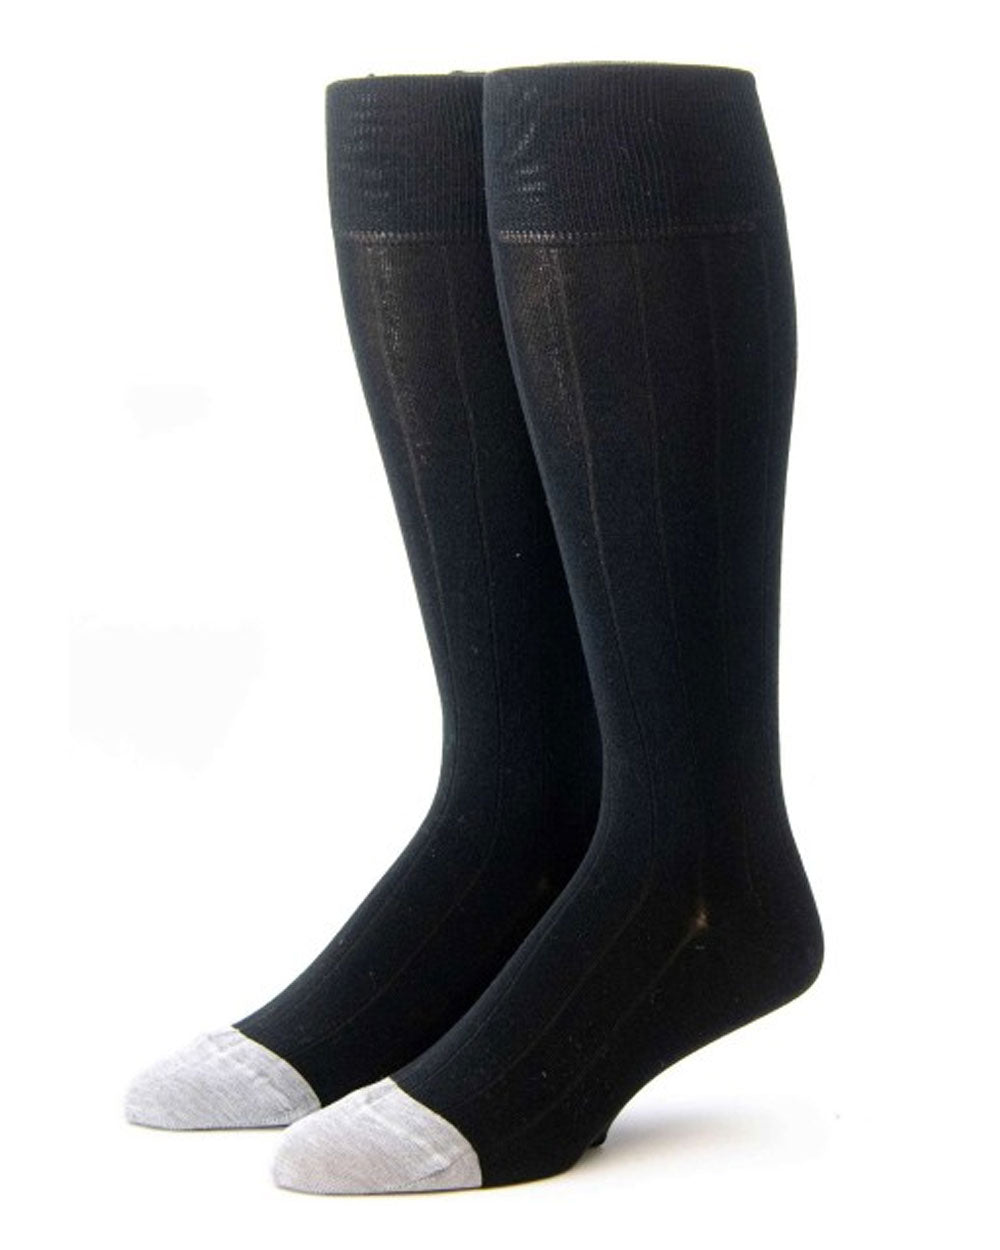 Over the Calf Socks in Black and Grey